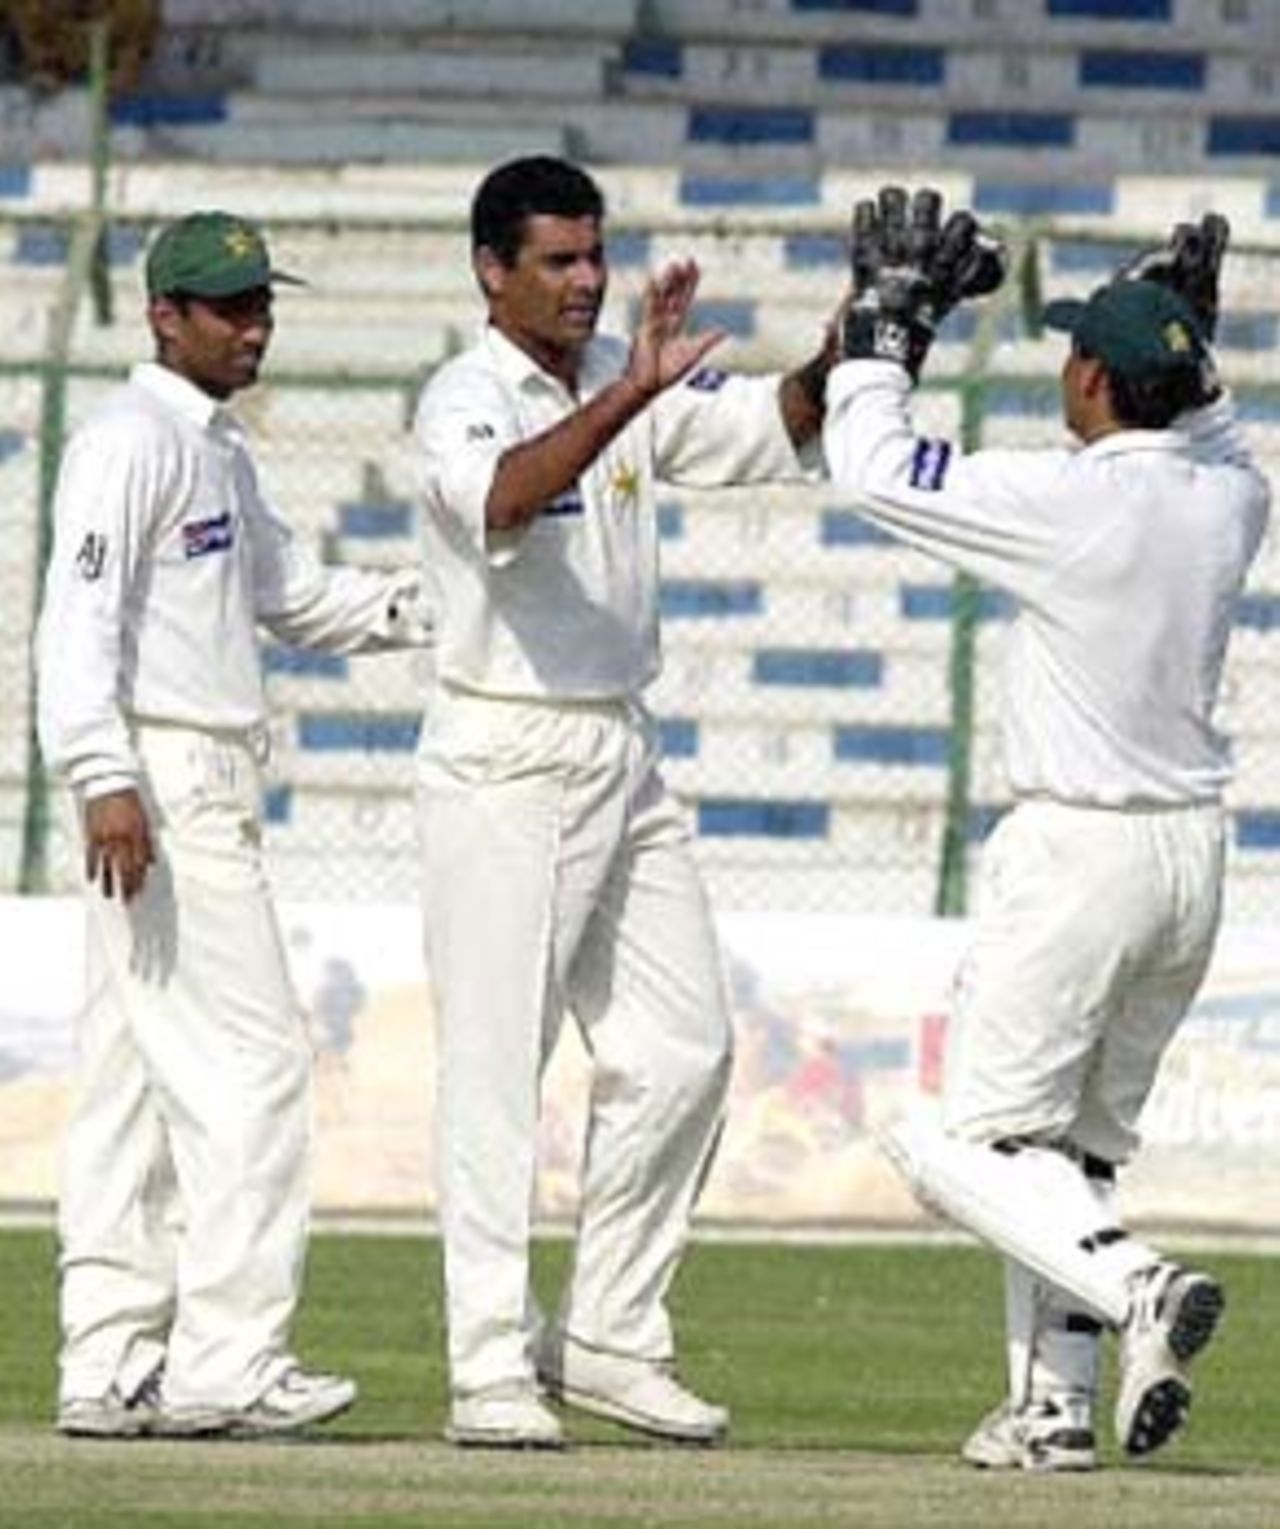 Pakistani pacer Waqar Younis (C) celebrates England batsman Graham Thorpe's fall with captain Moin Khan (R) and teammate Yousuf Youhanna (L) on day three of the third and final Tests at National stadium Karachi, 09December, 2000. Younis took 2-41 as England reached 199-3 at tea in reply to Pakistan's 405 in their first innings